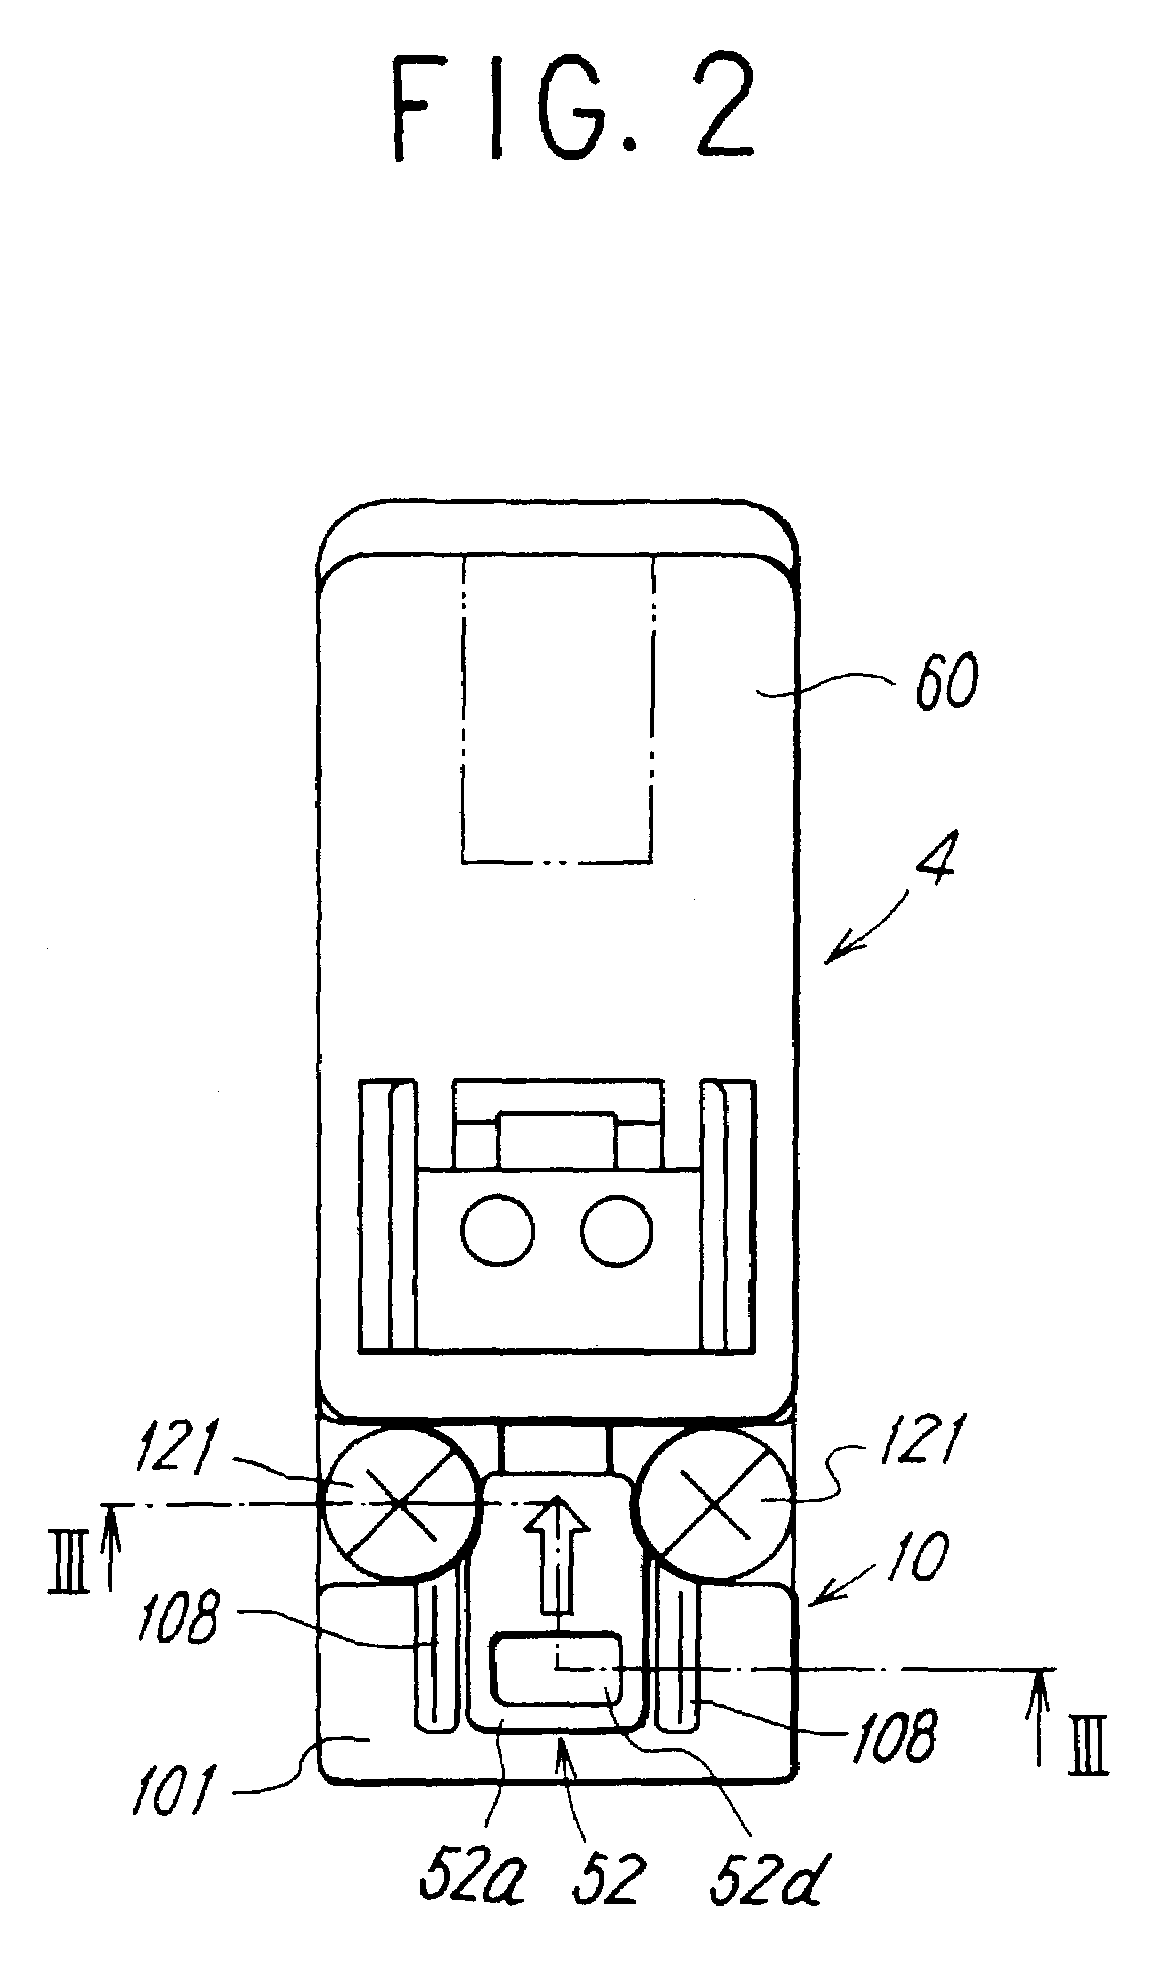 Solenoid valve having manually-operated device